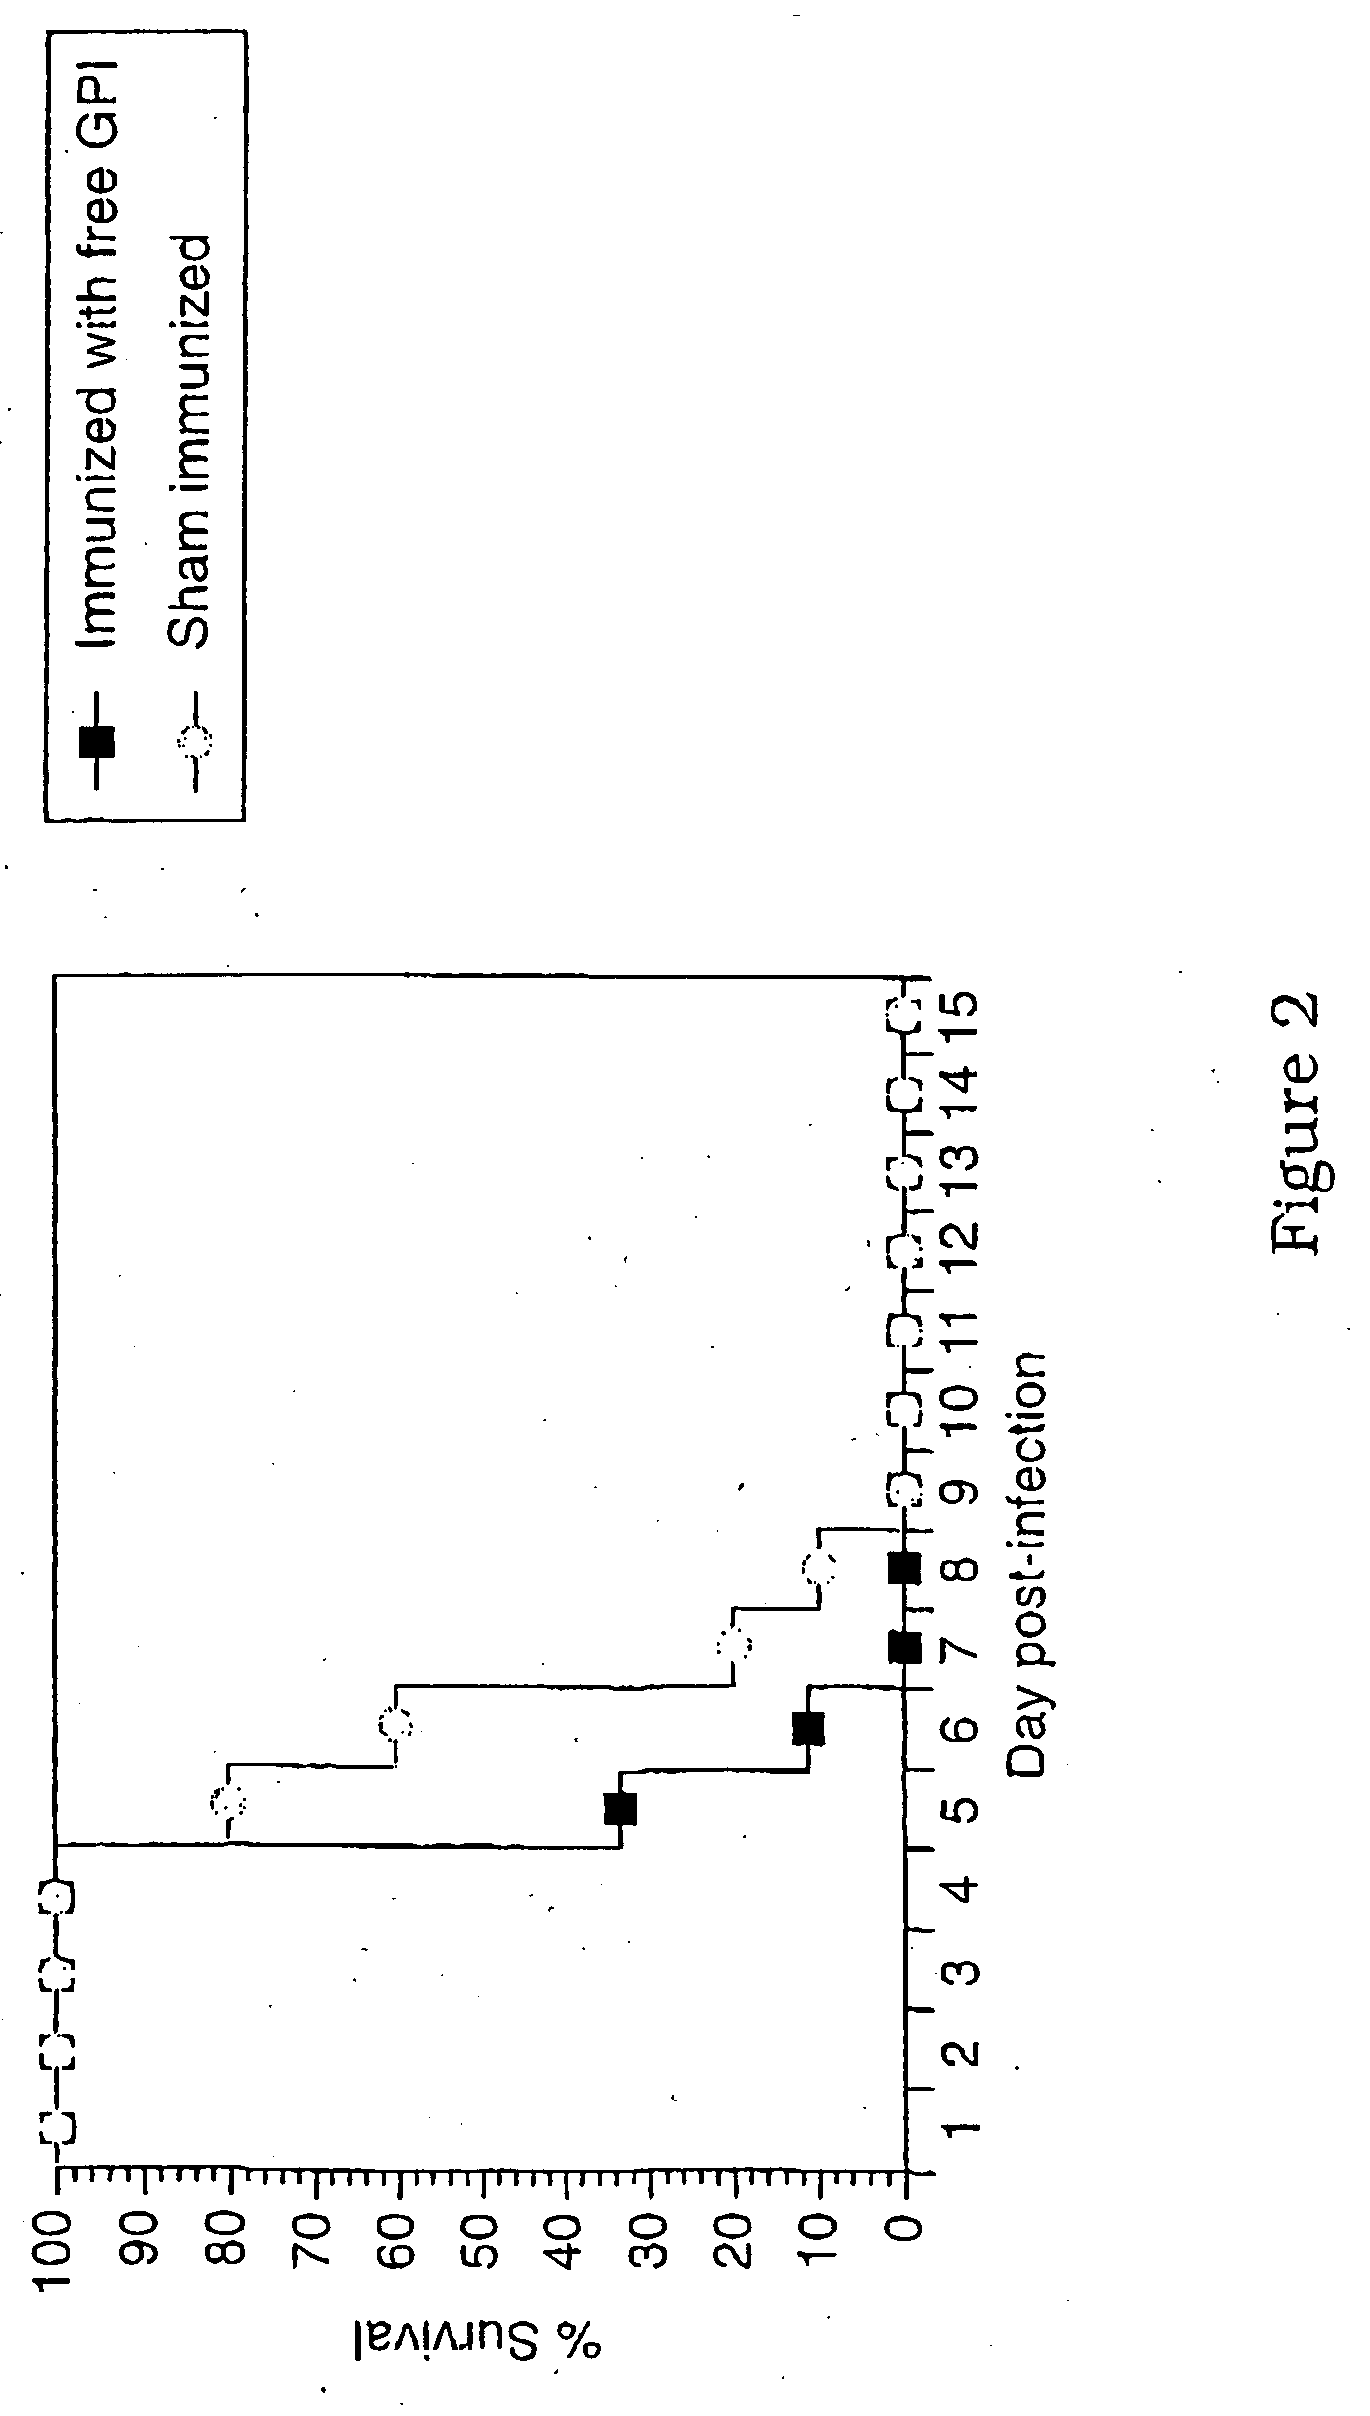 Immunogenic compositions and diagnostic and therapeutic uses thereof